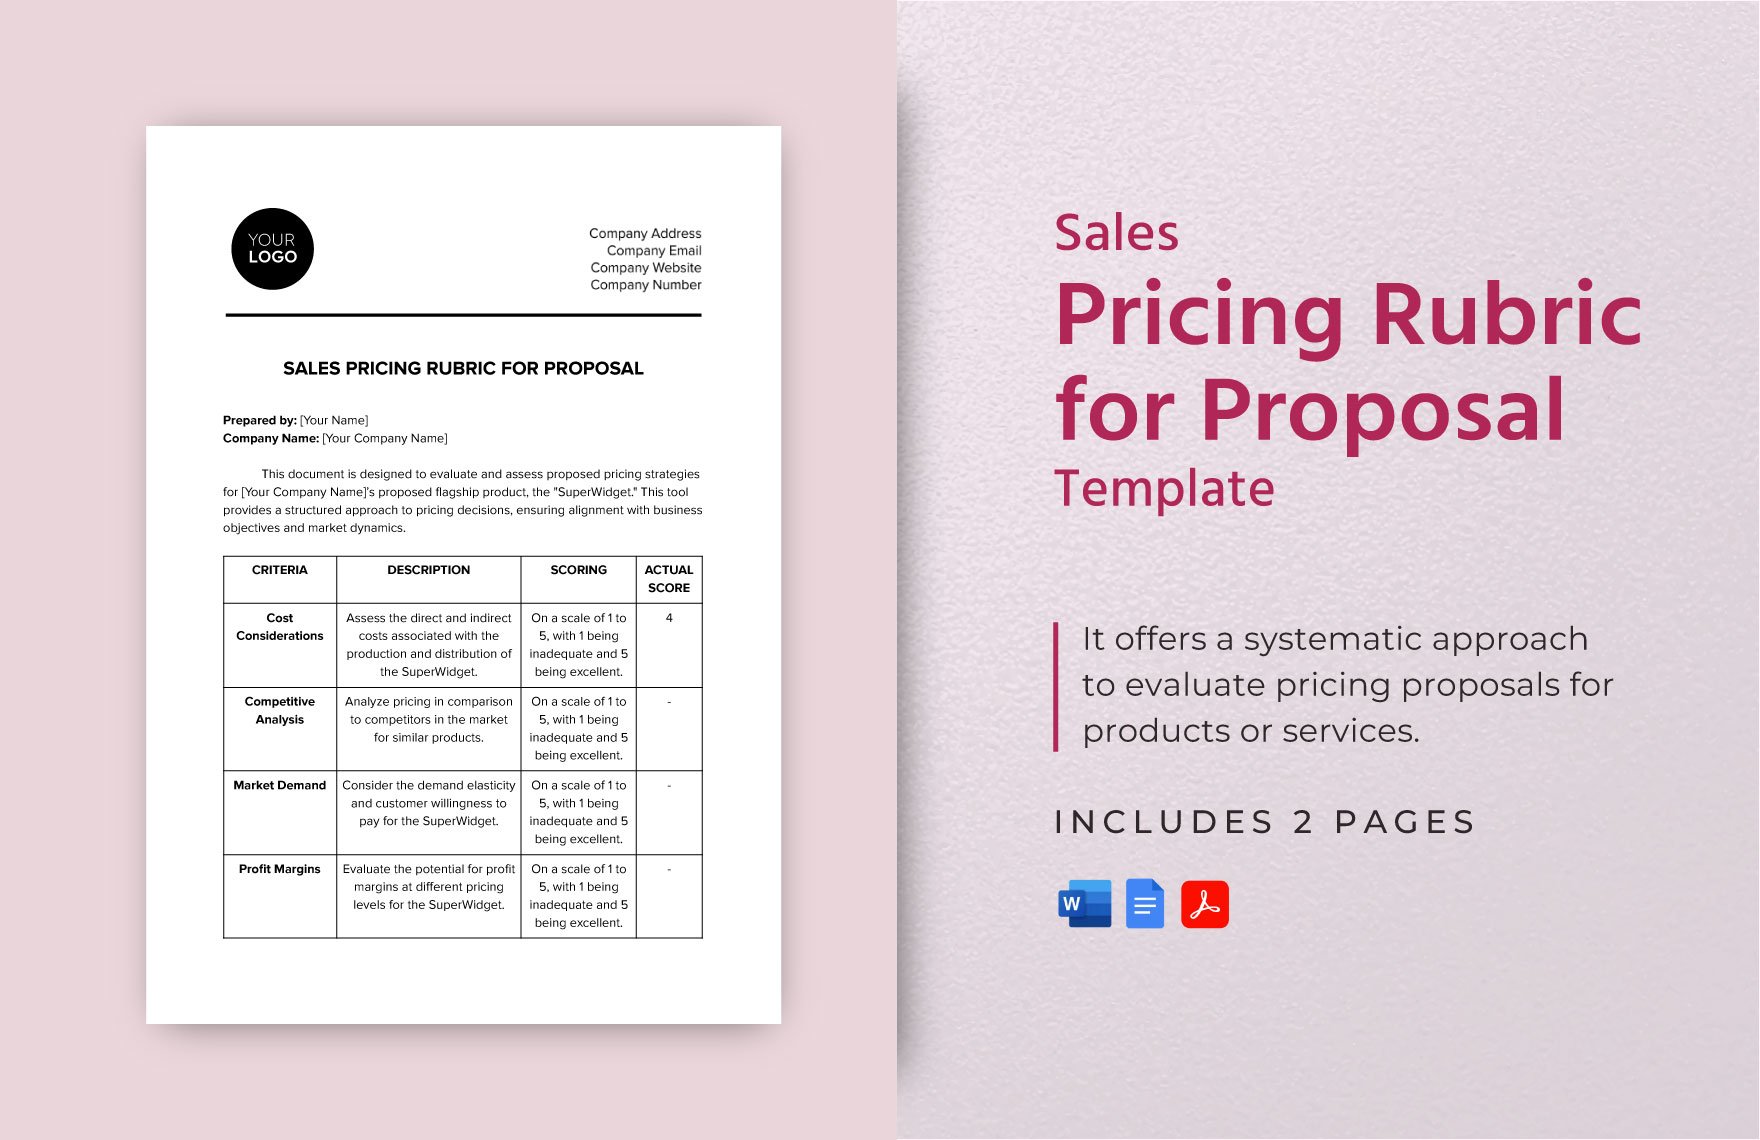 Sales Pricing Rubric for Proposal Template in Word, Google Docs, PDF